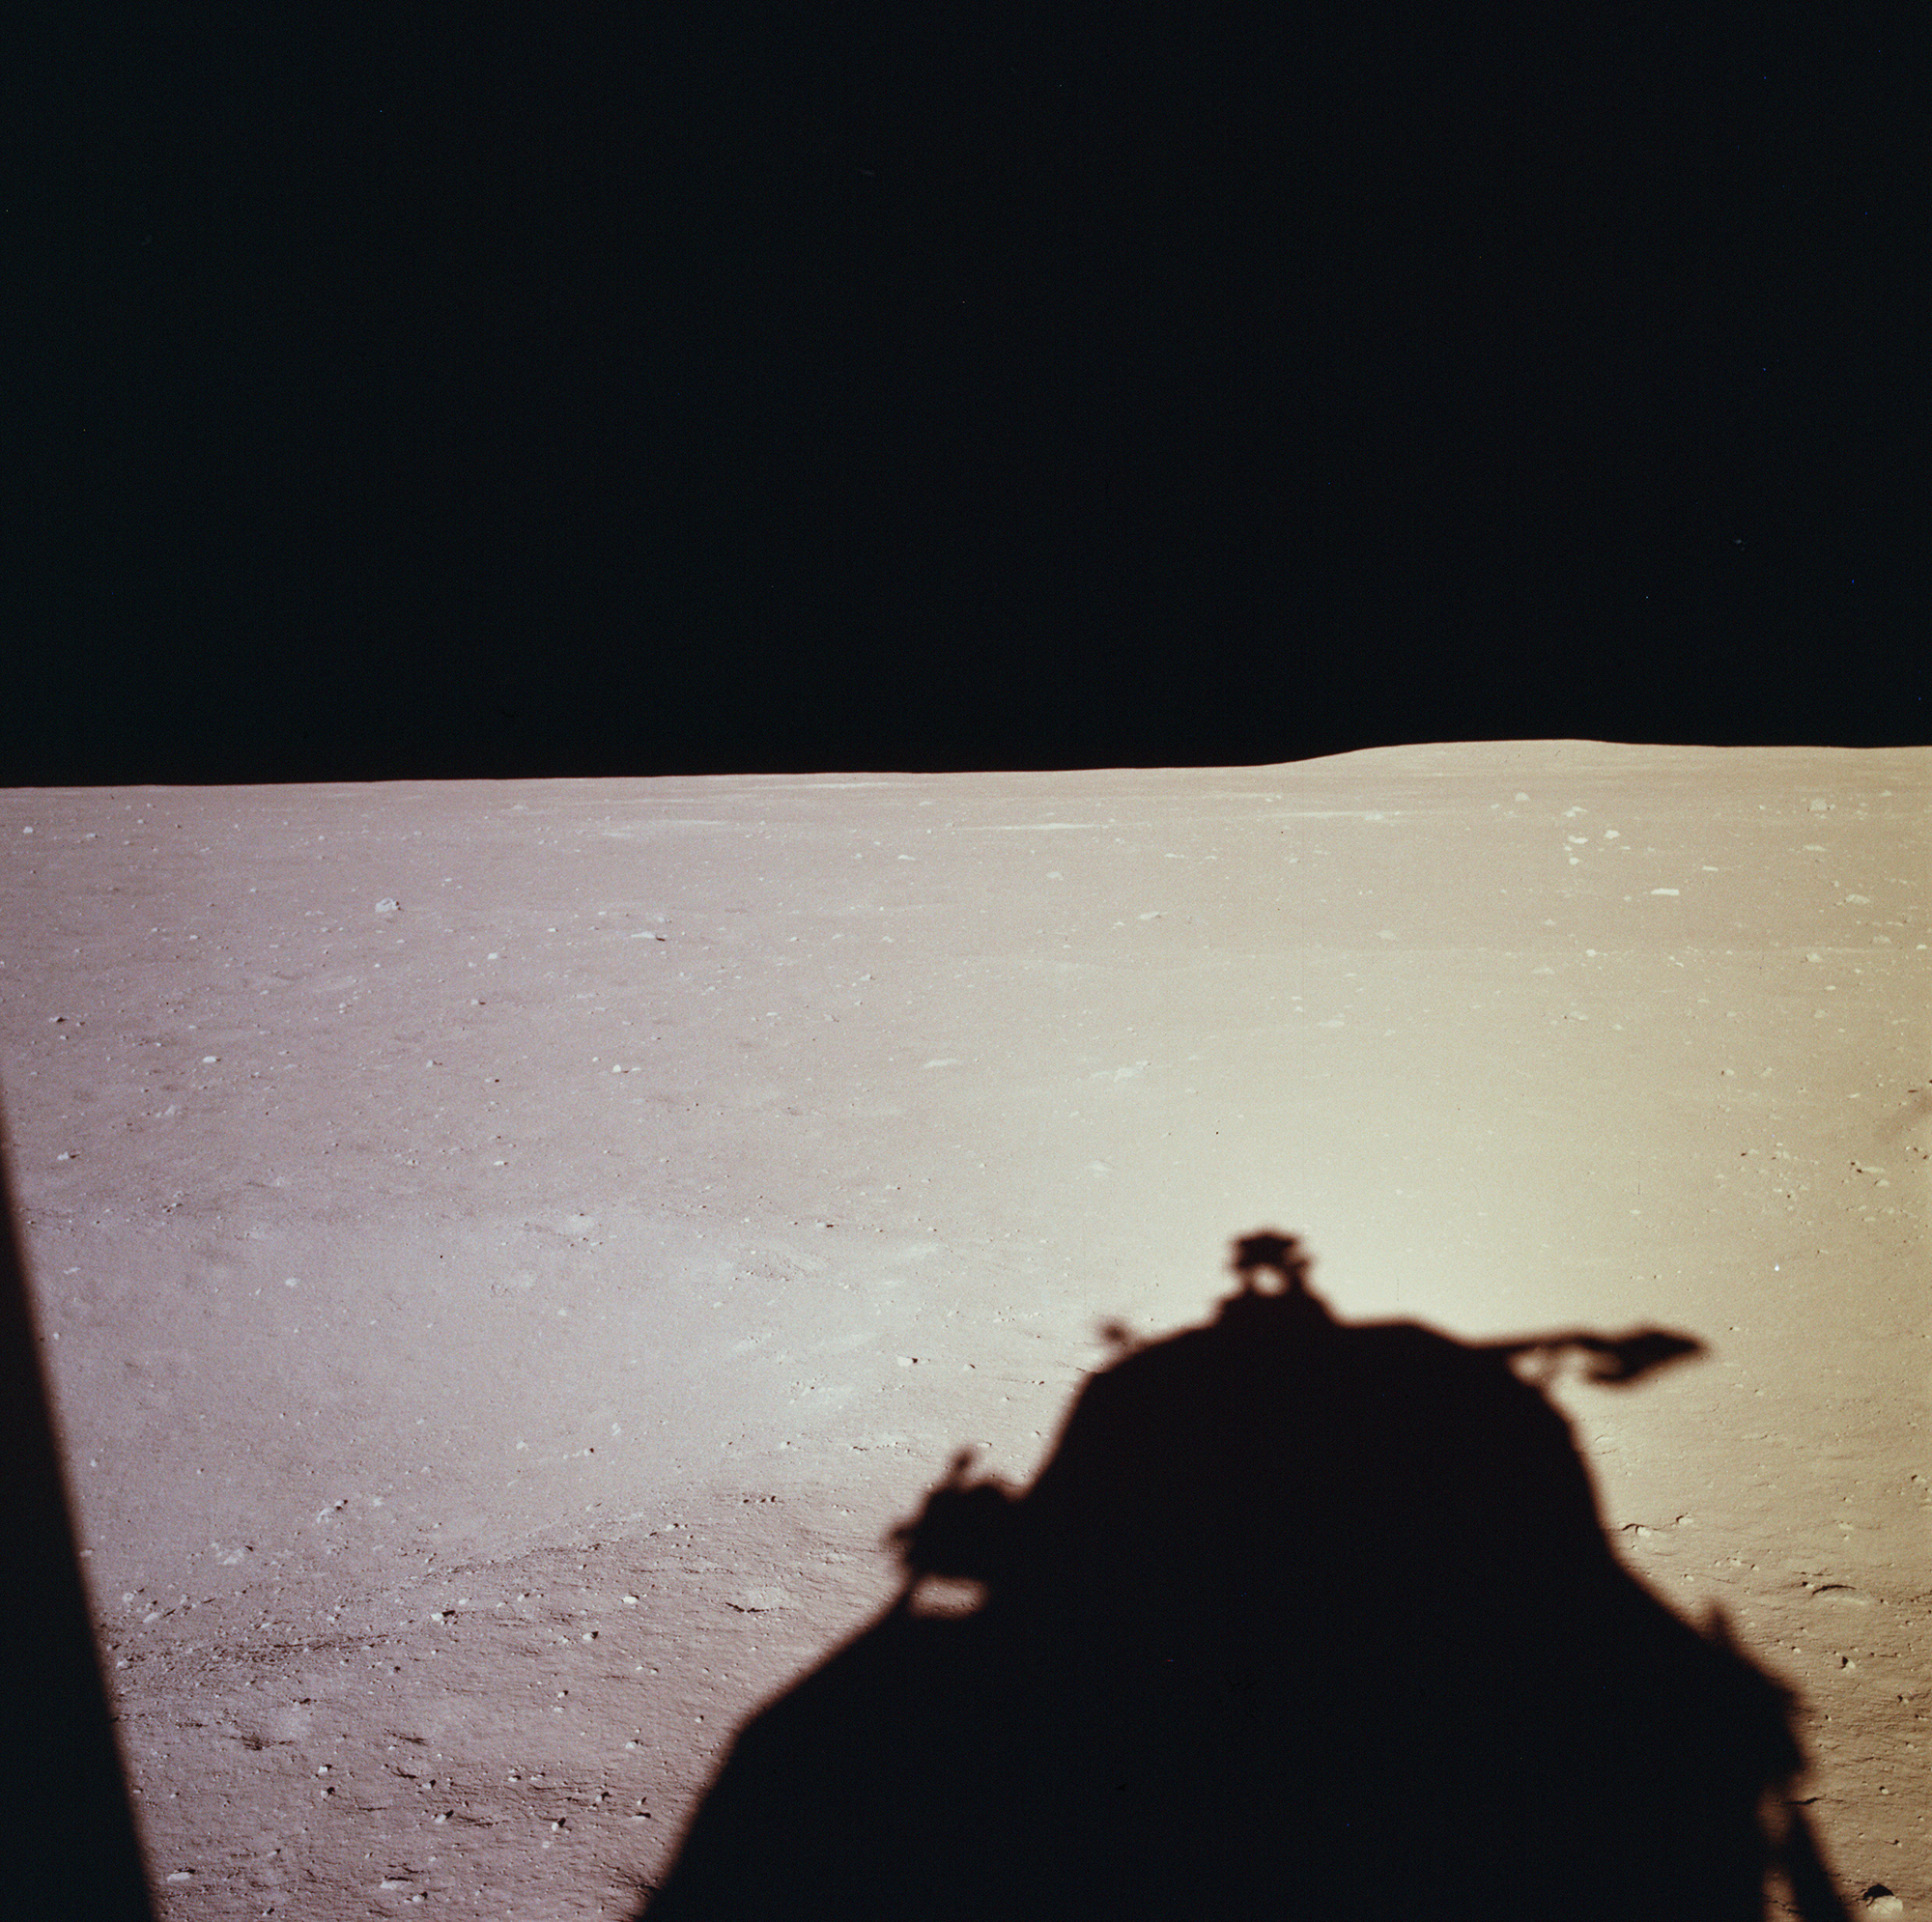 apollo-11-lm-shadow-from-window-after-landing.jpg